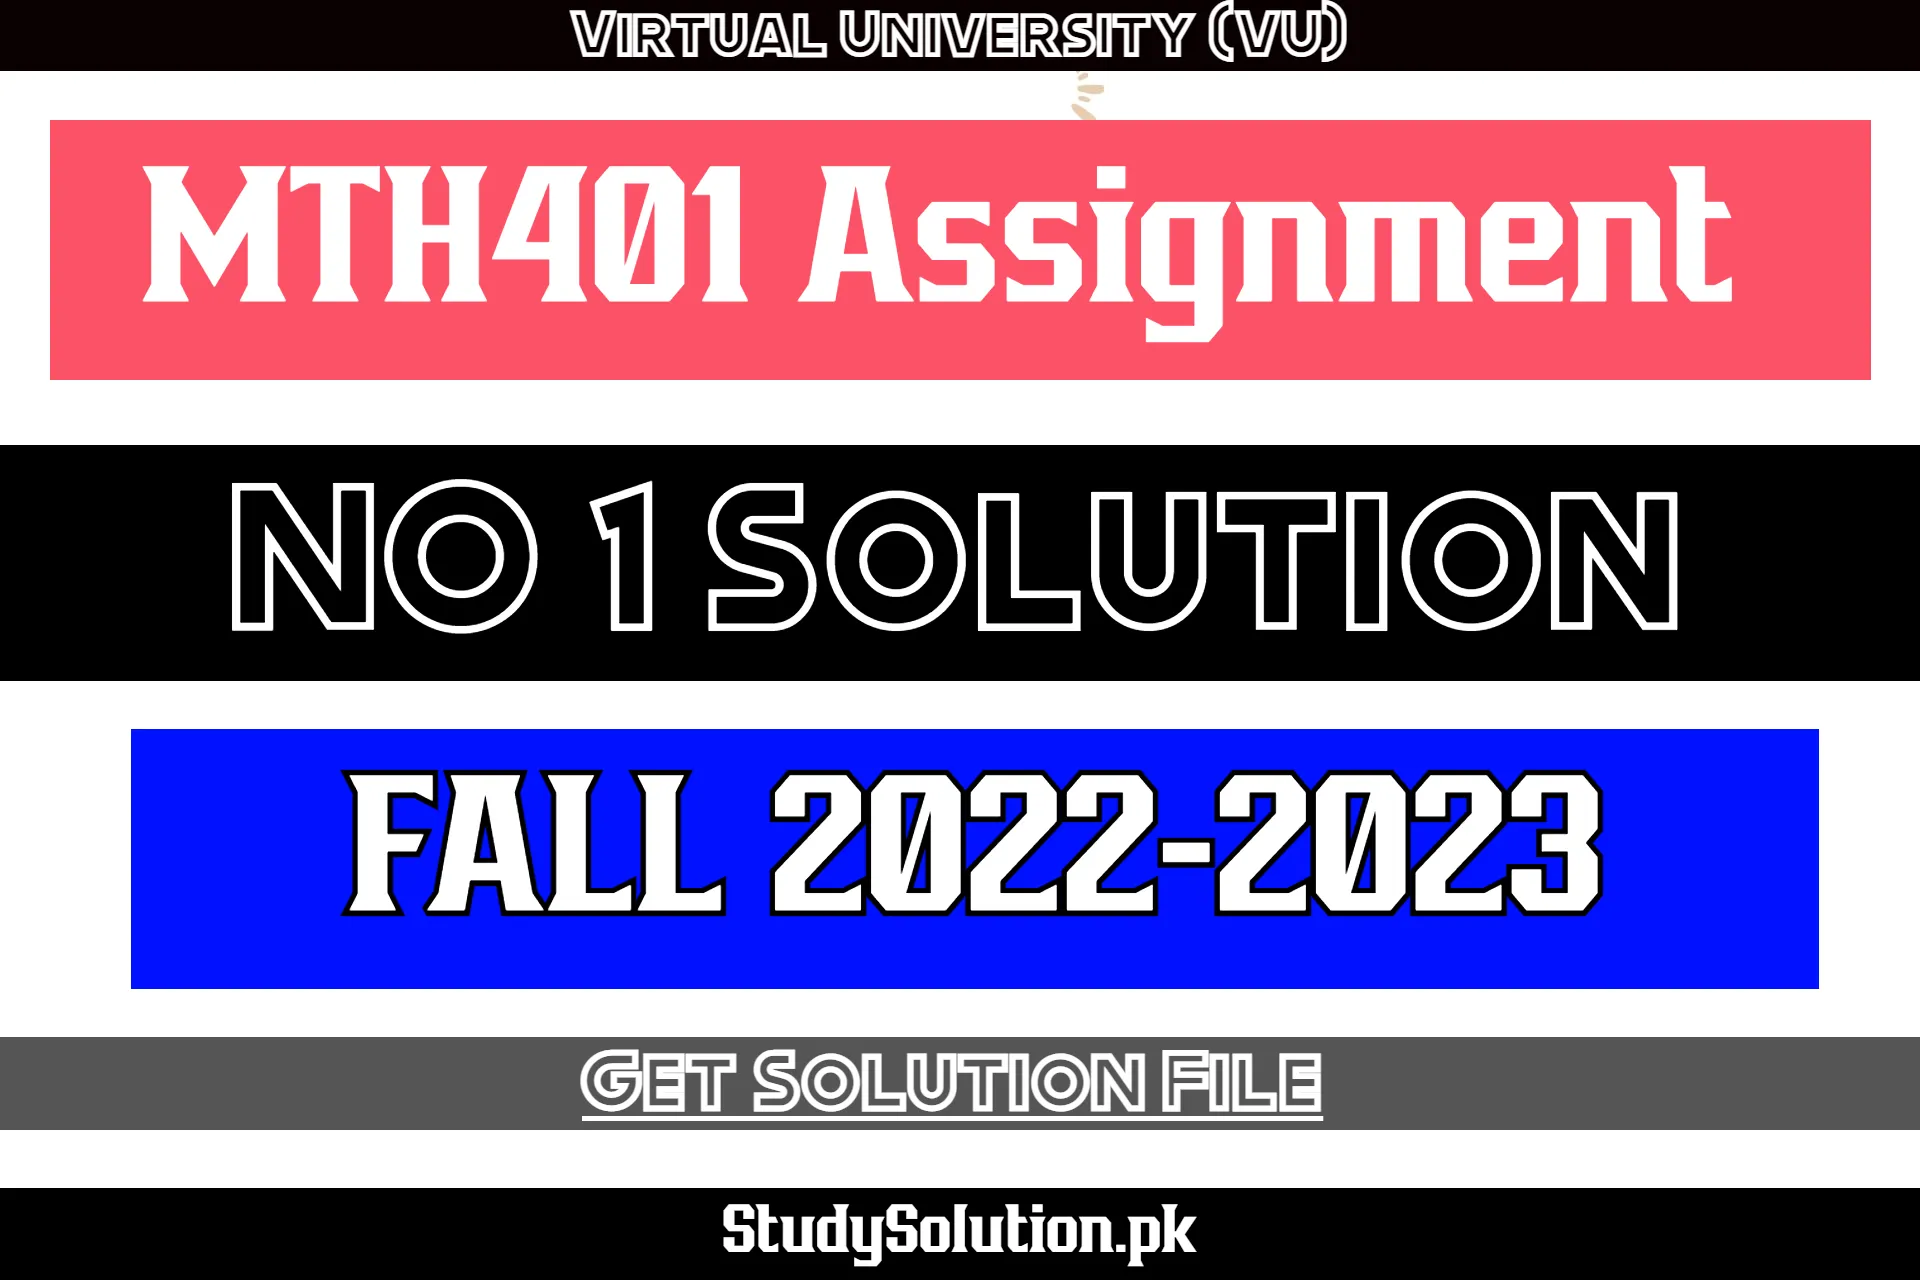 MTH401 Assignment No 1 Solution Fall 2022